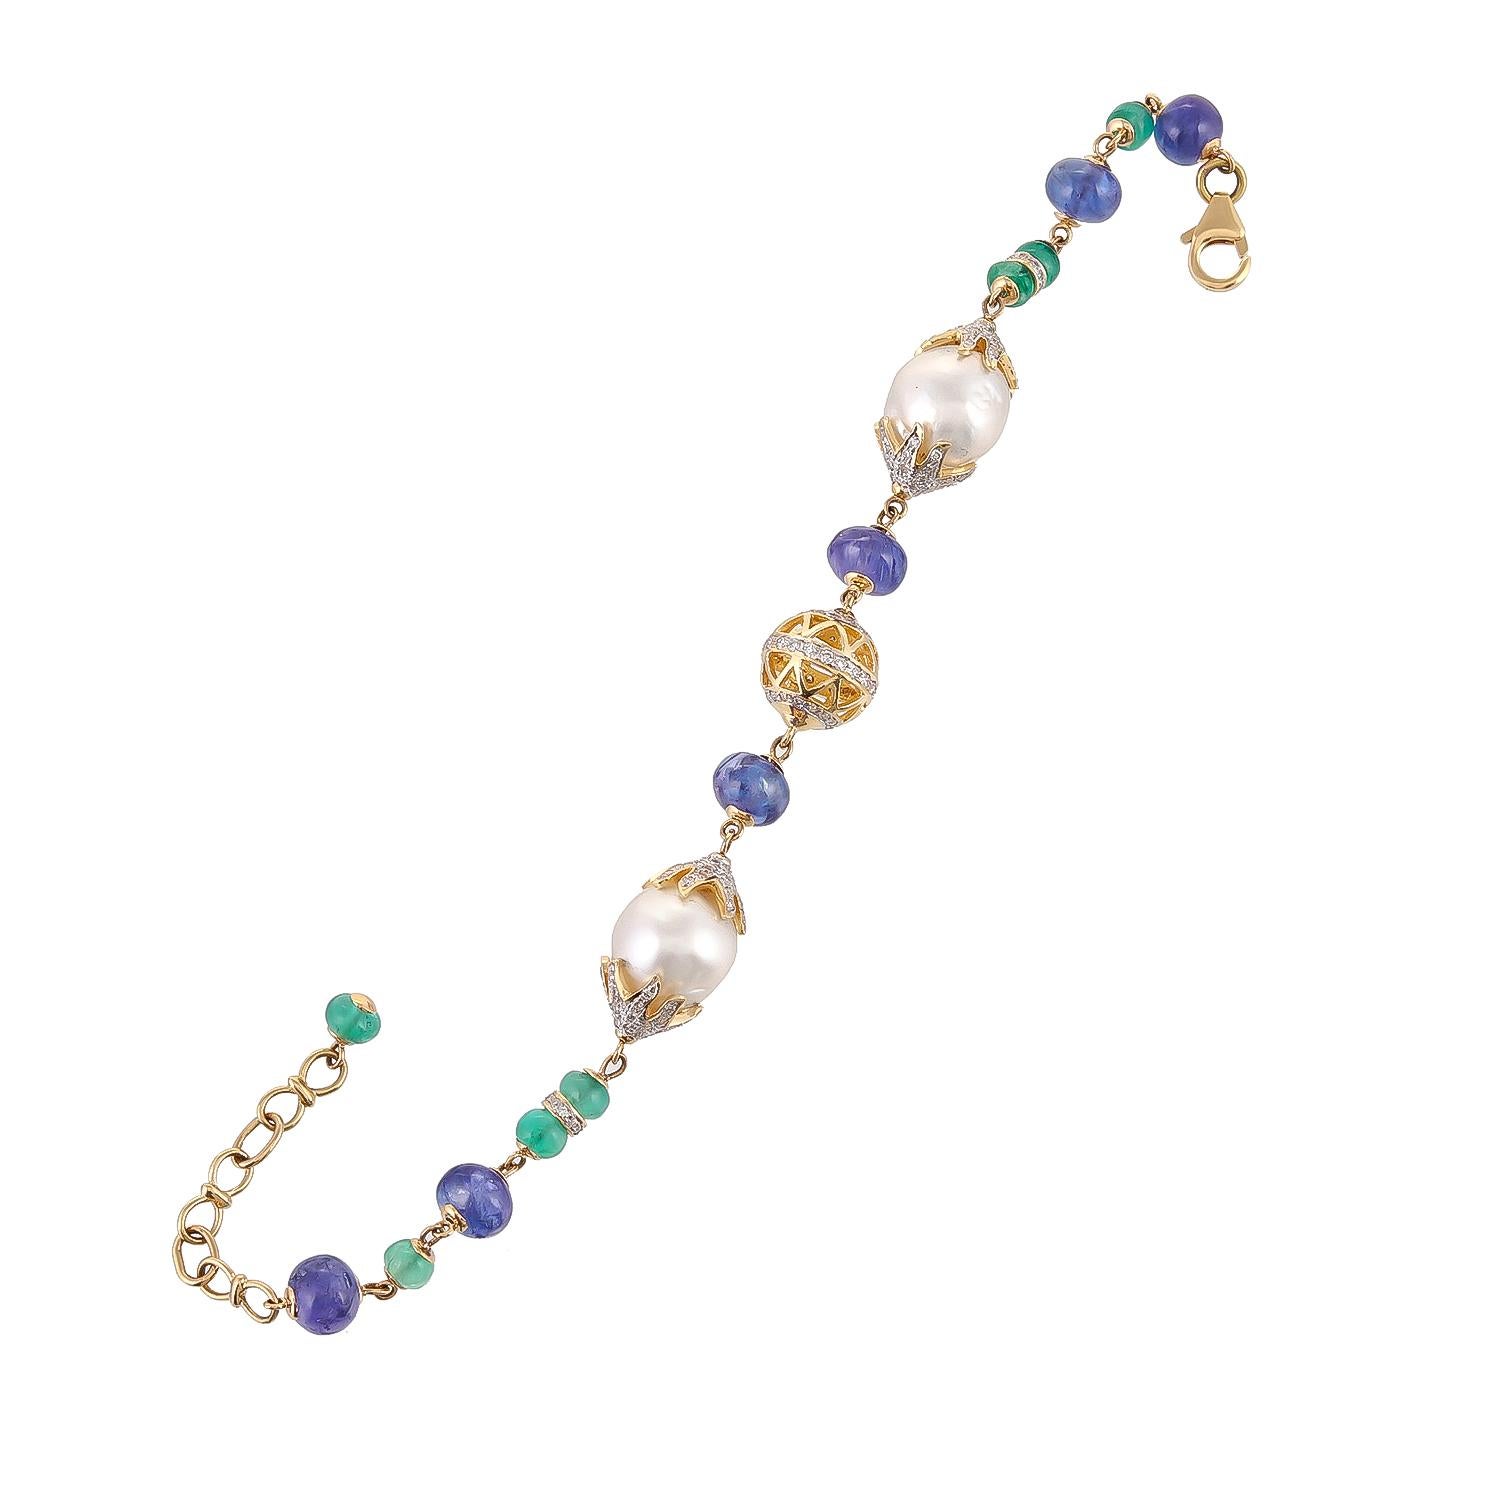 22.17 carats south sea pearl with 4.60 carats emeralds and 17.27 carats tanzanite beads make such a simple but fashionable bracelet. Decorated with 18 karats gold and diamond filigree ball with a total diamond weight of 1.30 carats, this elegant